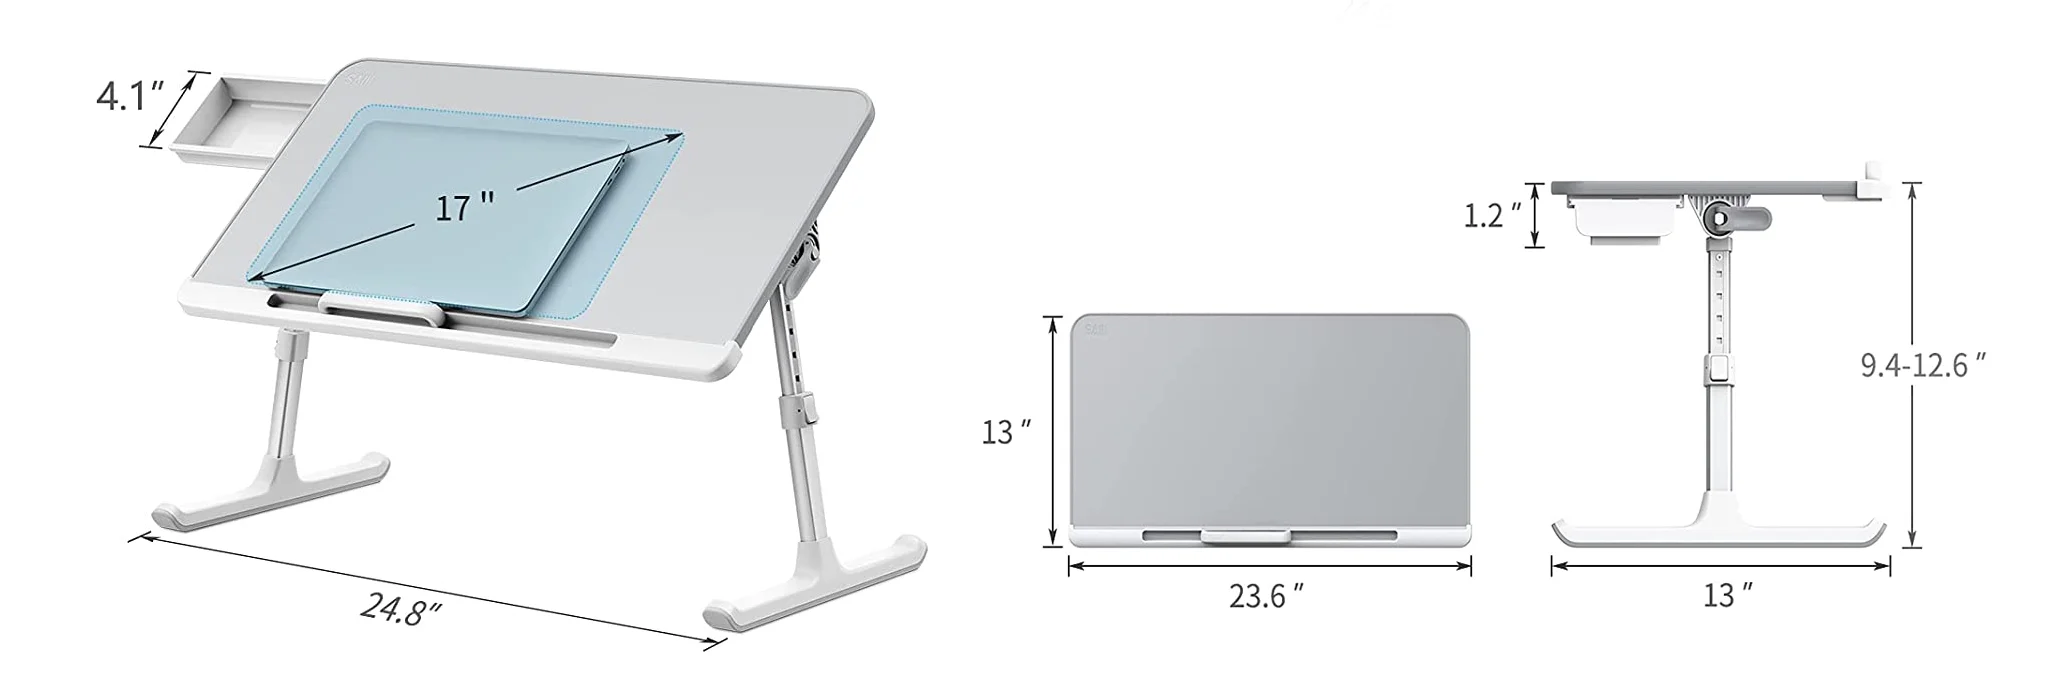 Dimensions of Laptop Table